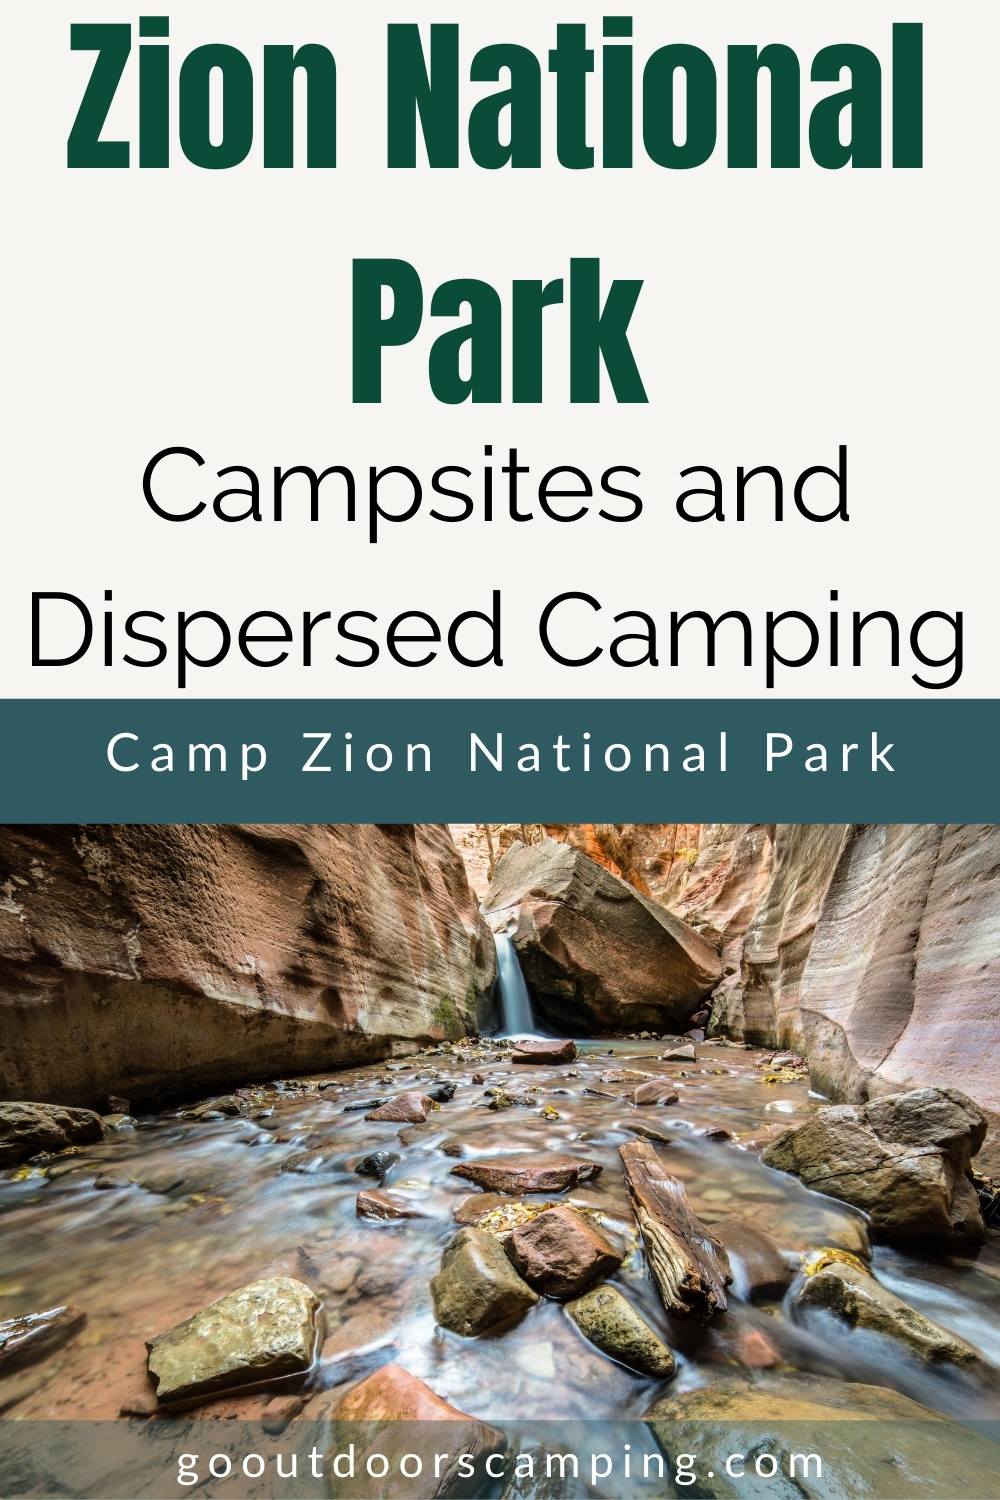 Zion National Park Campsites and Dispersed Camping